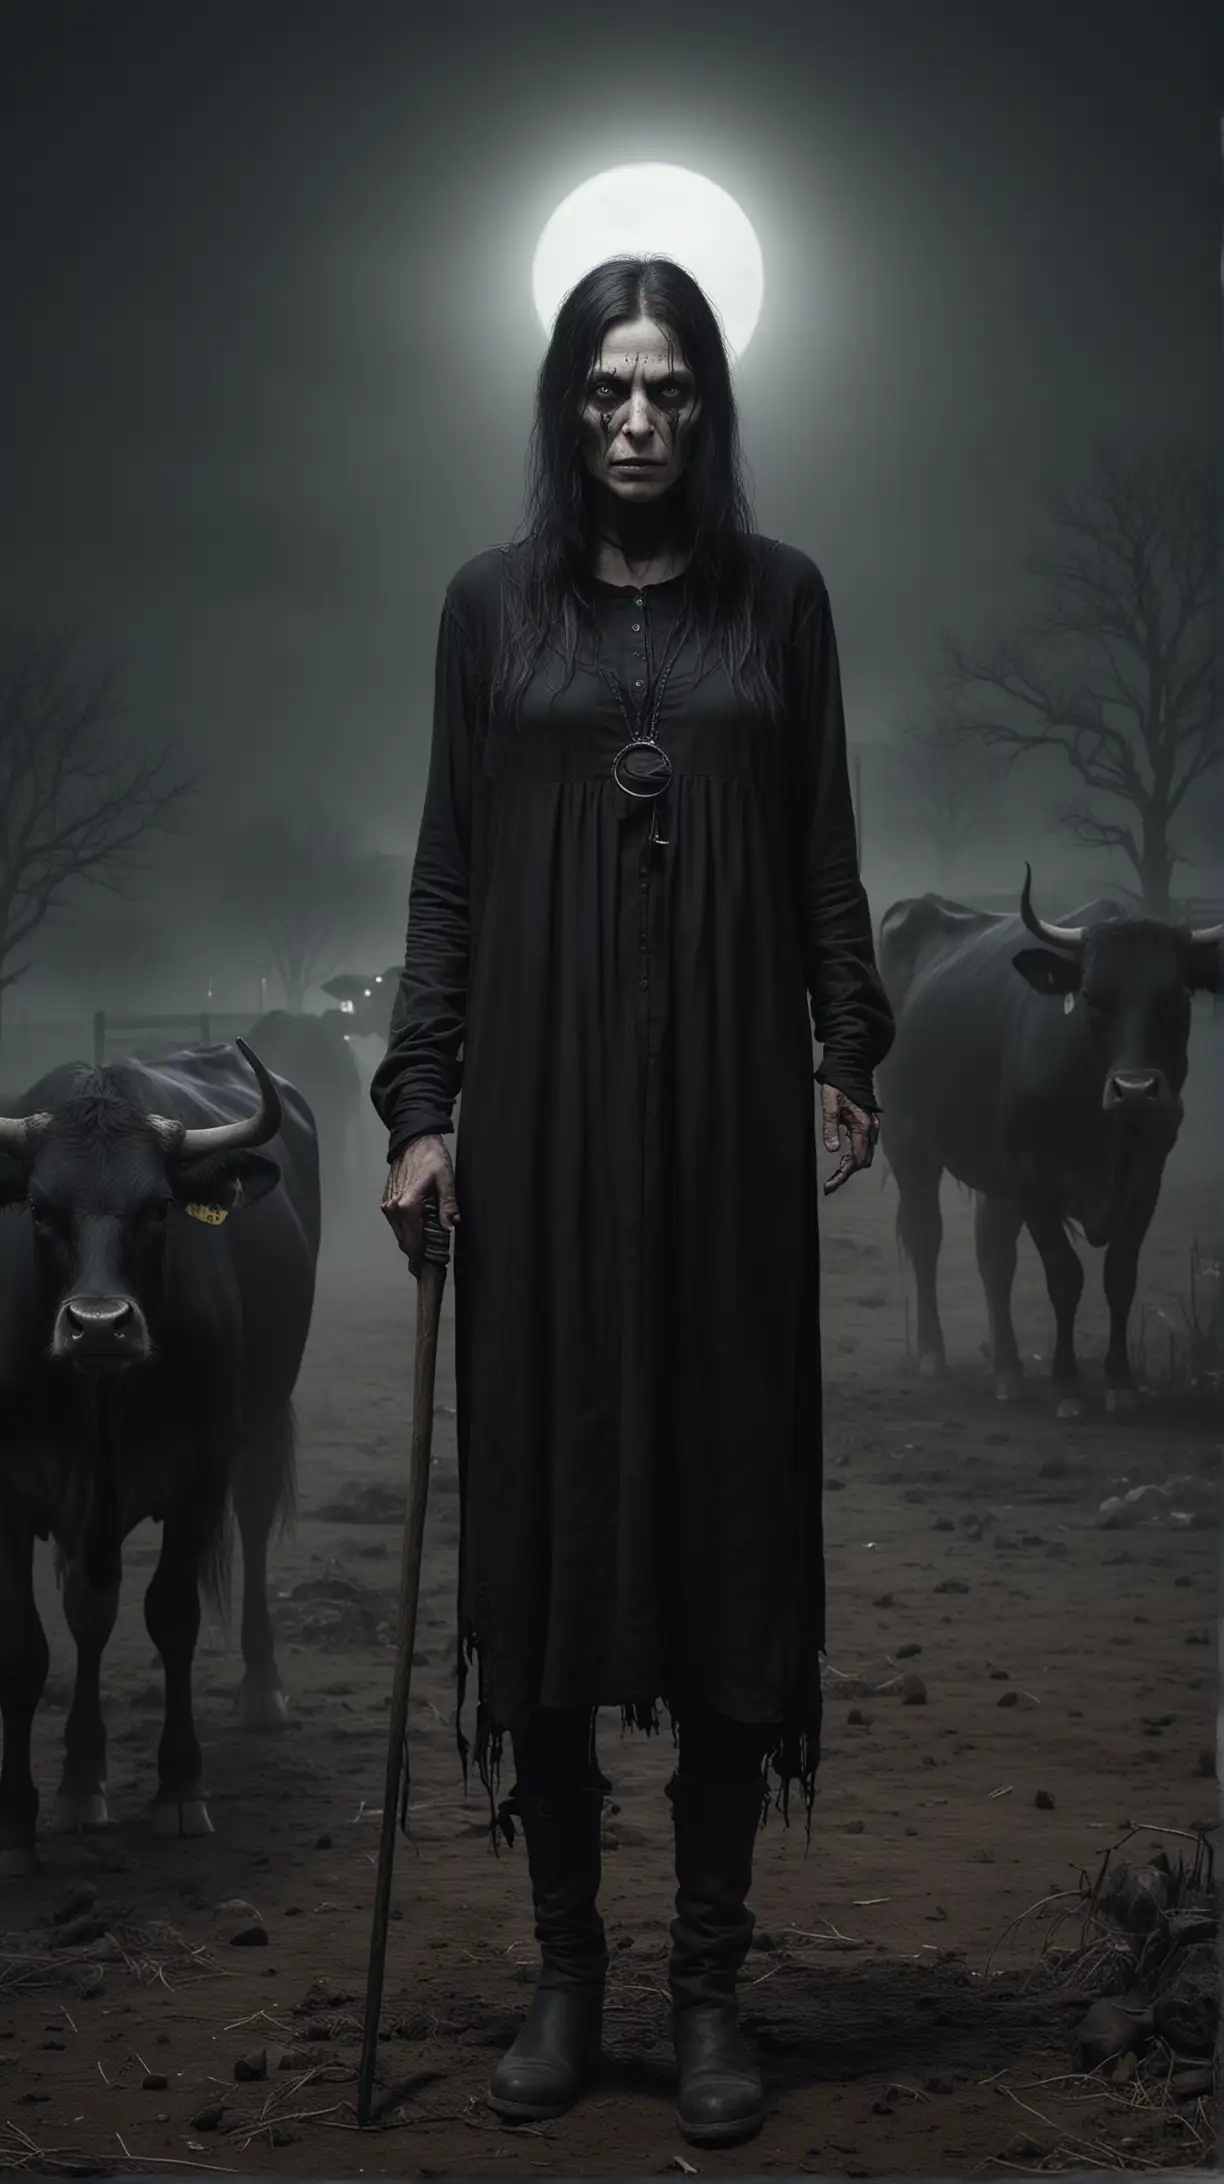 dark horror style, ugly dead  very thin old one-eyed woman, wearing black clothing, dark horror style, staying by cattle in the midnight on background, hyper-realistic, photo-realistic